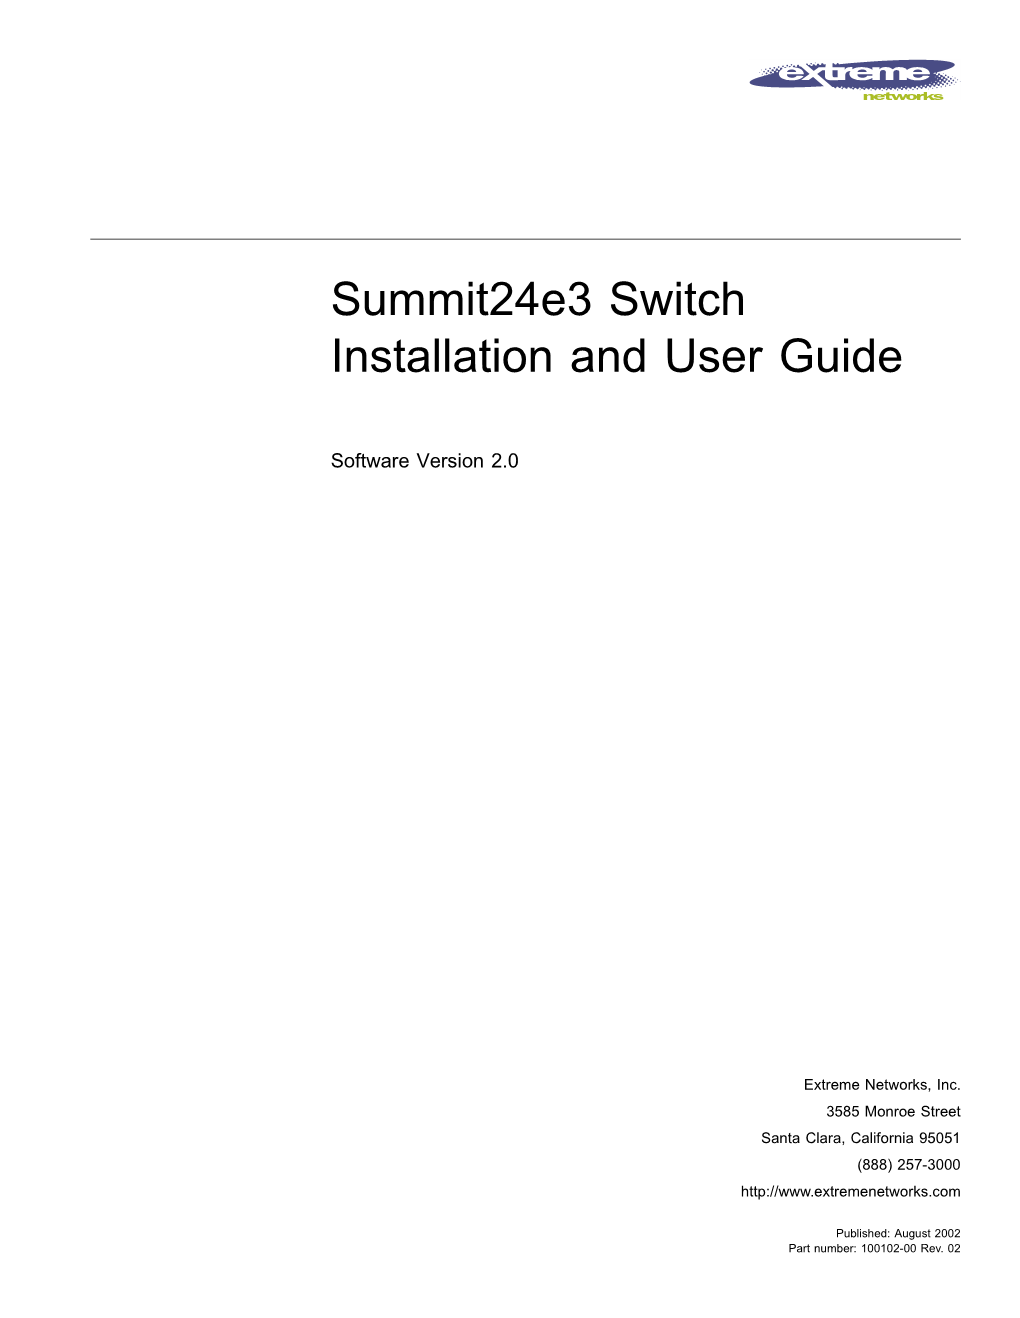 Summit24e3 Switch Installation and User Guide